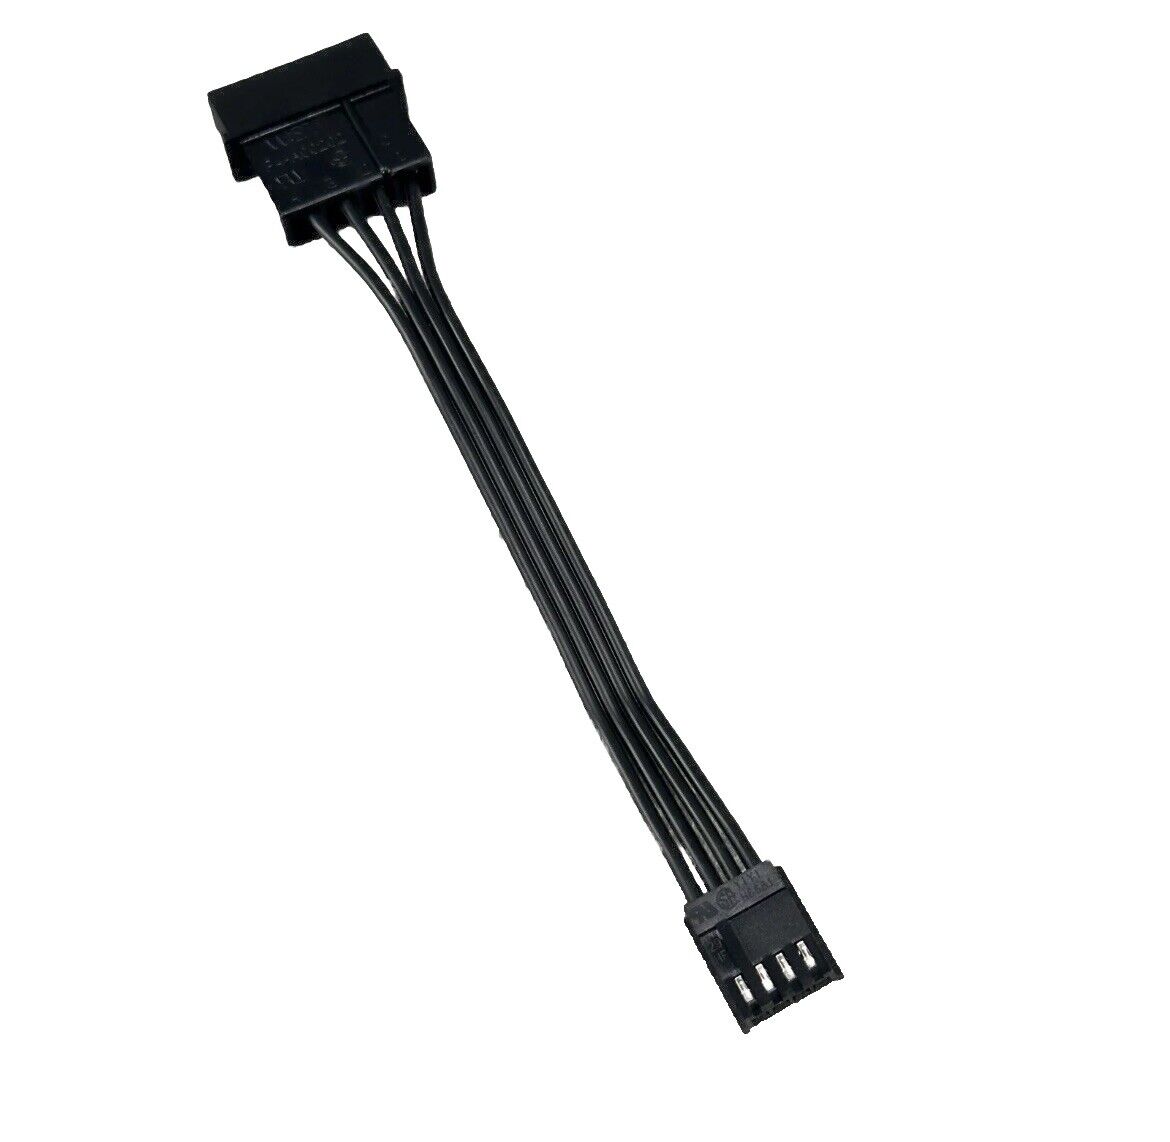 Molex - 4 pin Male Internal Power Cable to 4 pin plug-in cards (HR)